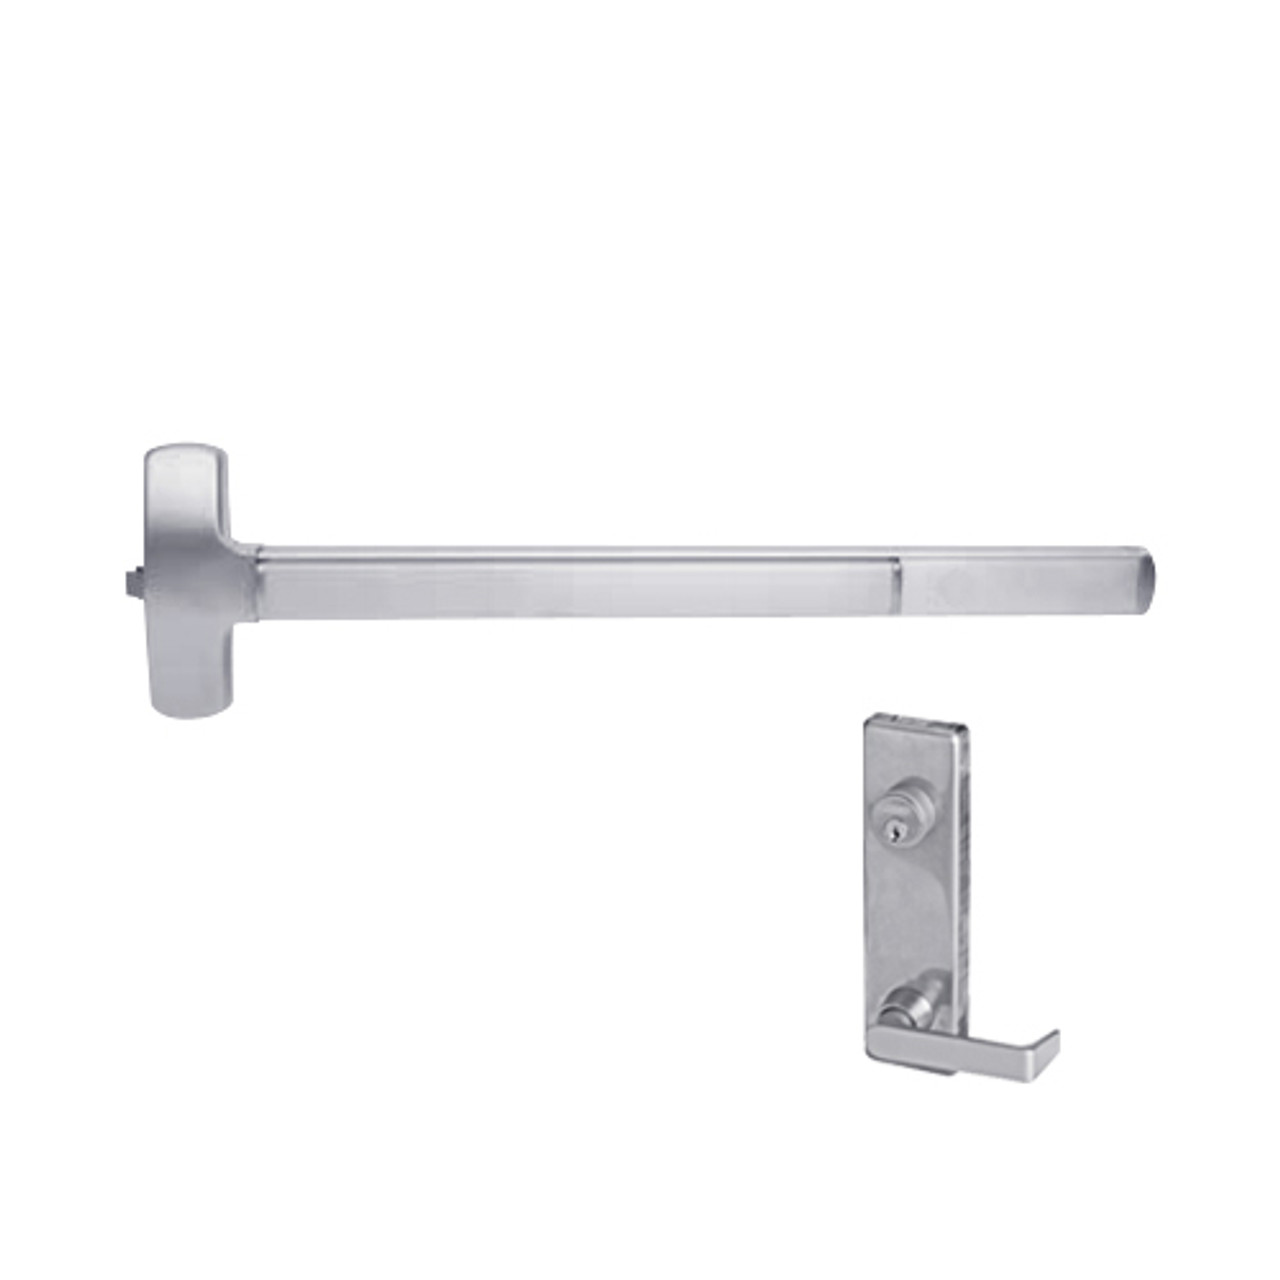 F-25-R-L-NL-DANE-US32-4-LHR Falcon Exit Device in Polished Stainless Steel